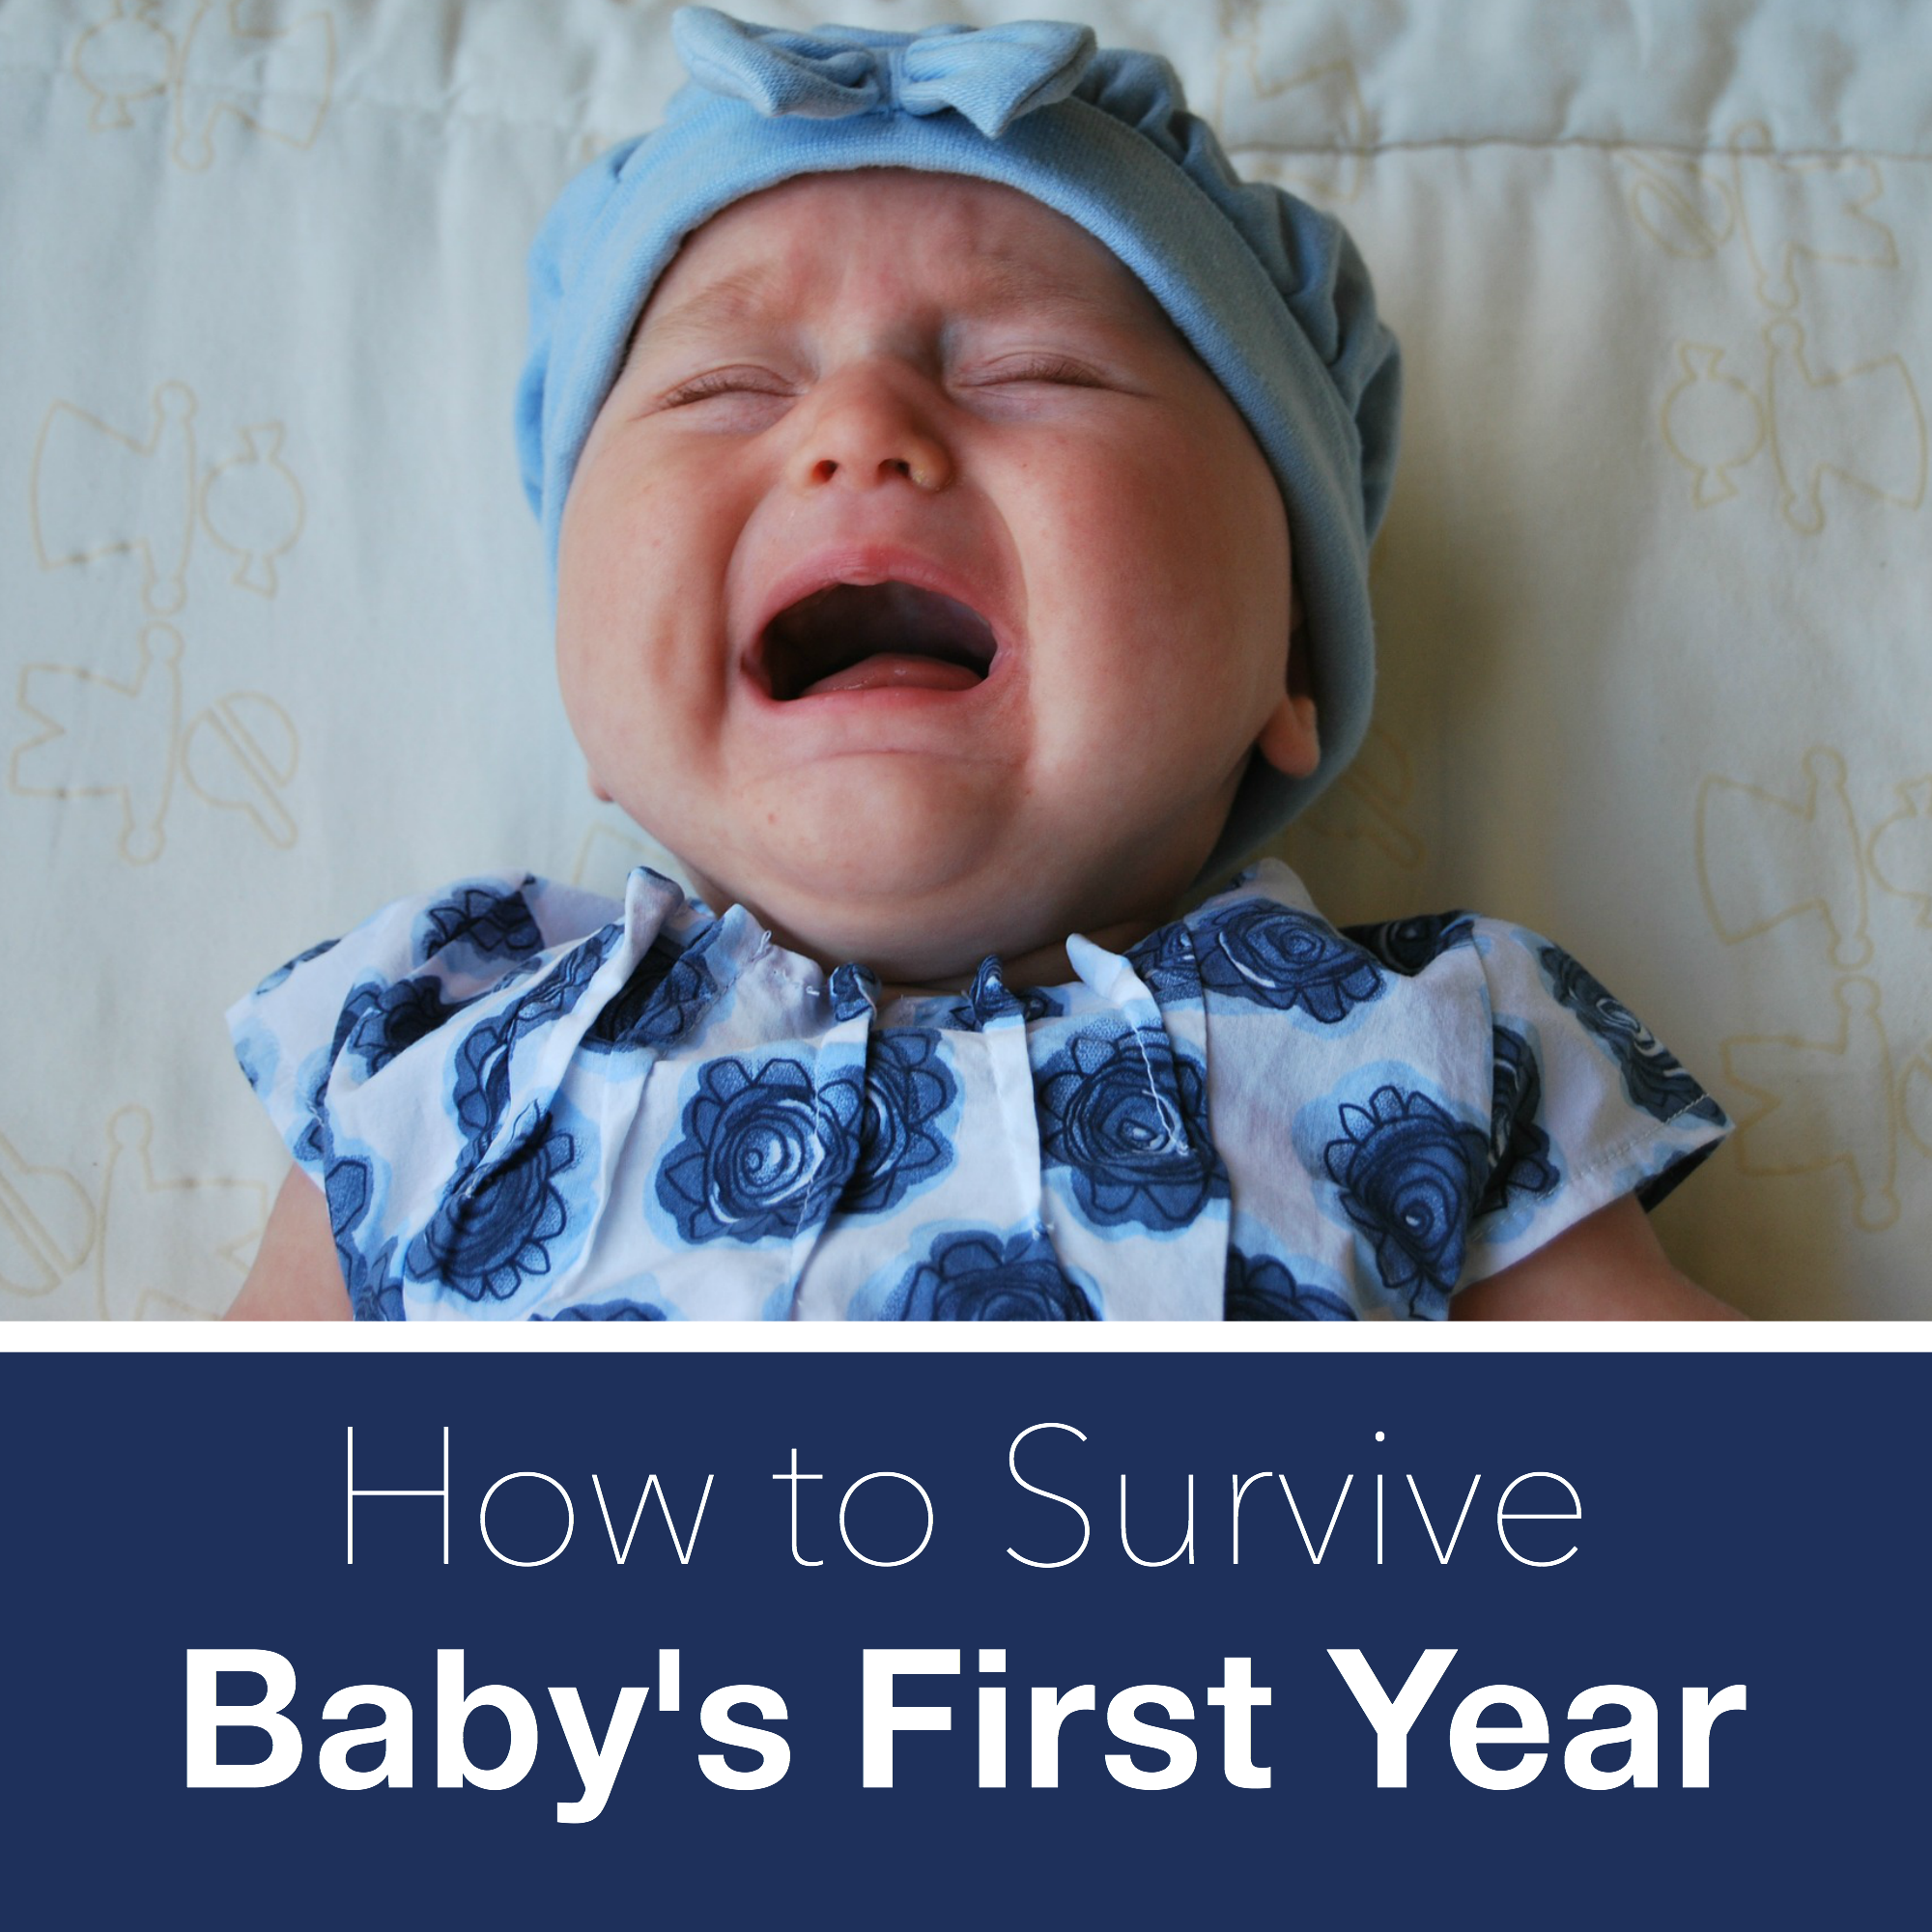 How to Survive Baby's First Year